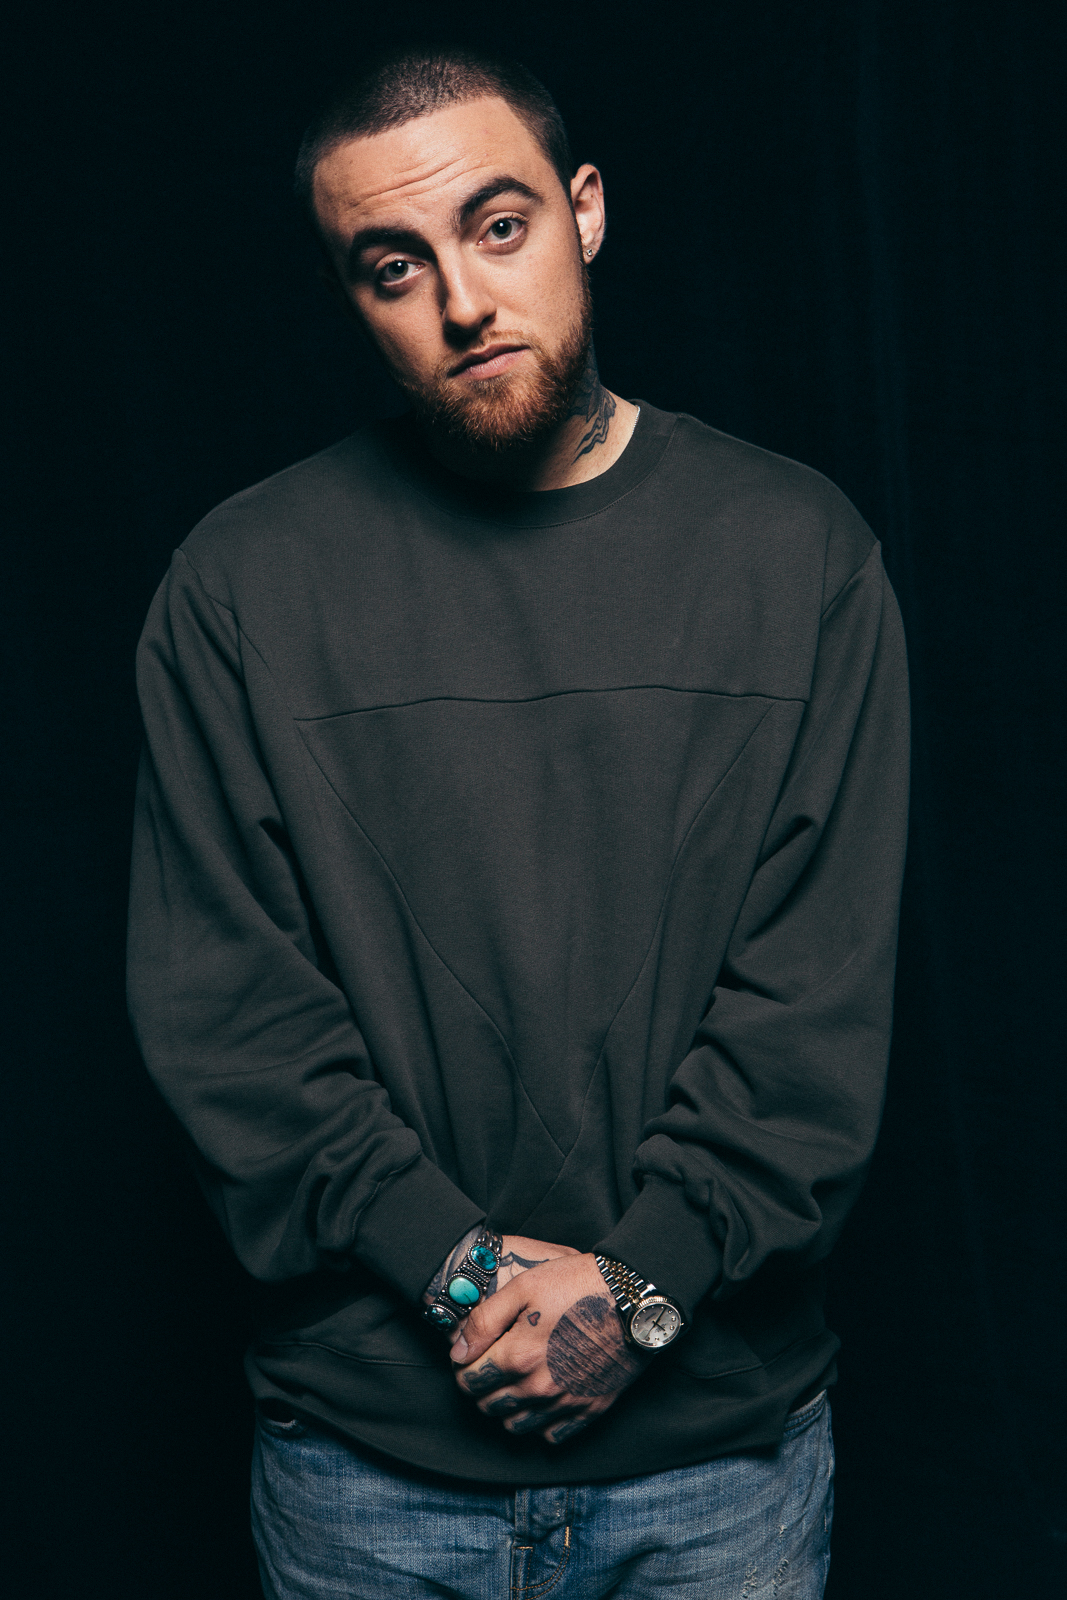 Is Mac Miller Rapping About Ariana Grande in His New Song? All the Drama Since Their Split